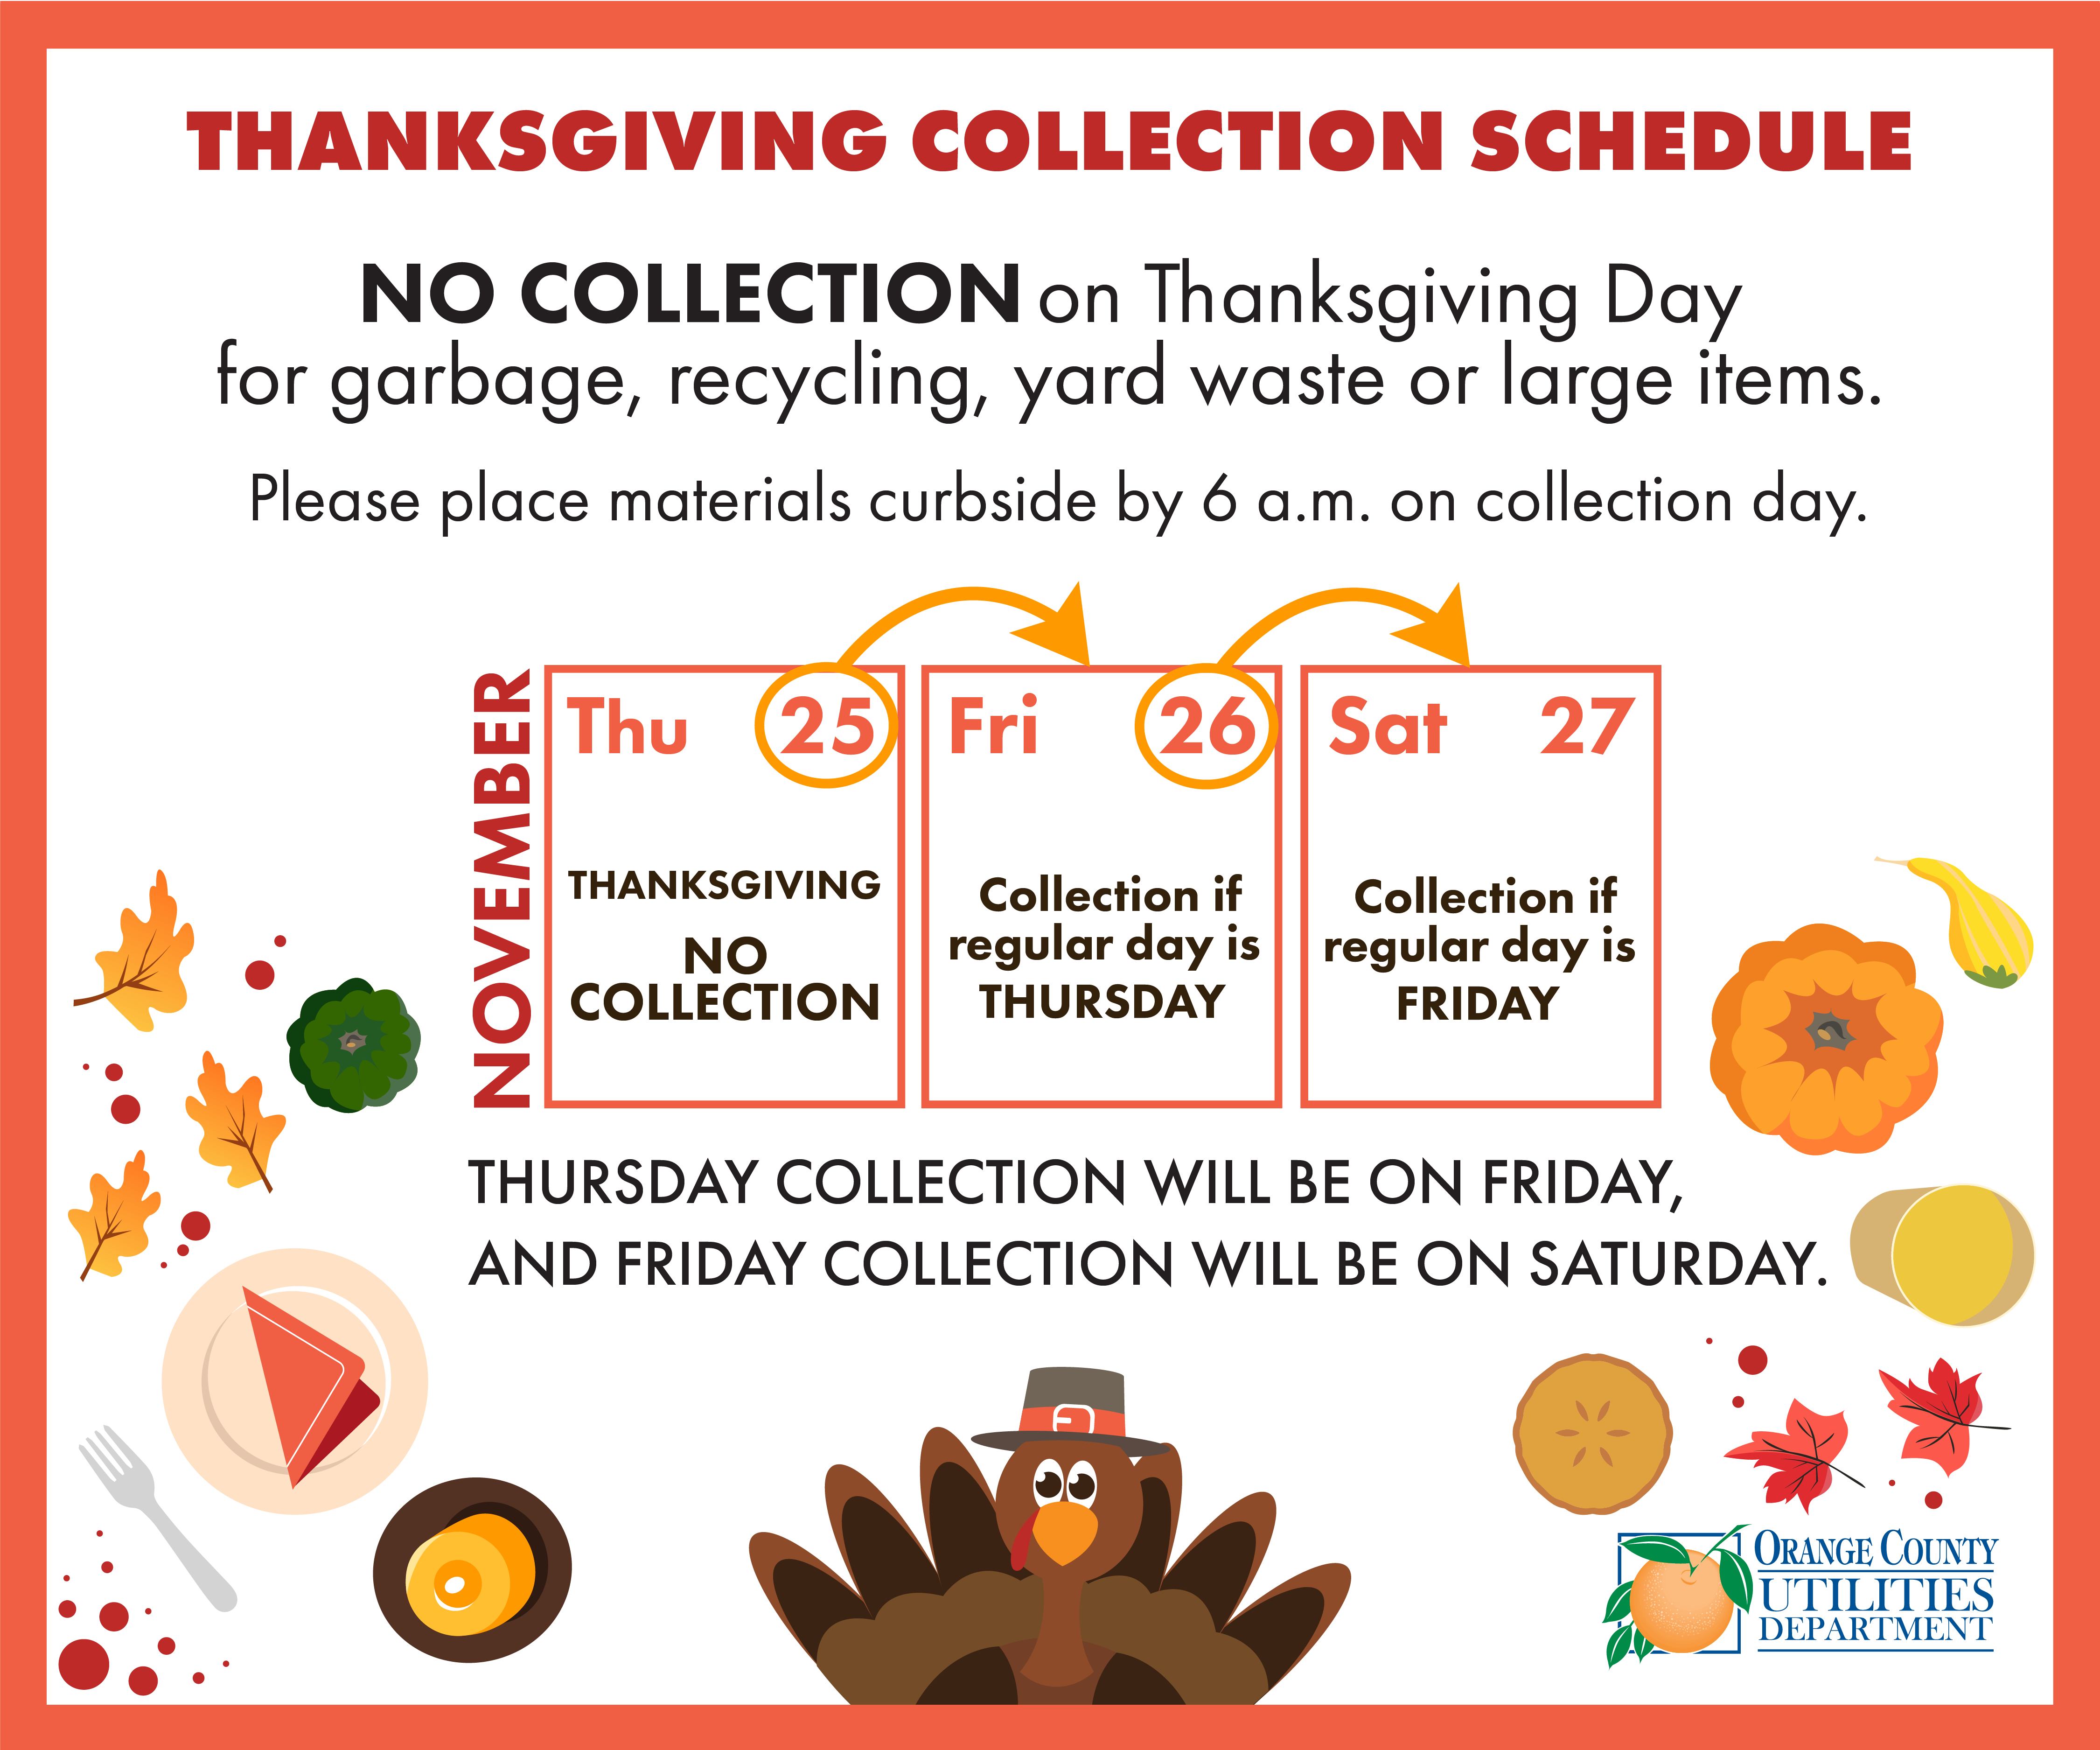 Thanksgiving Collection Schedule - NO COLLECTION on Thanksgiving Day for garbage, recycling, yard waste or large items. Please place materials curbside by 6 a.m. on collection day. Thursday collection will be on Friday, and Friday collection will be on Saturday.